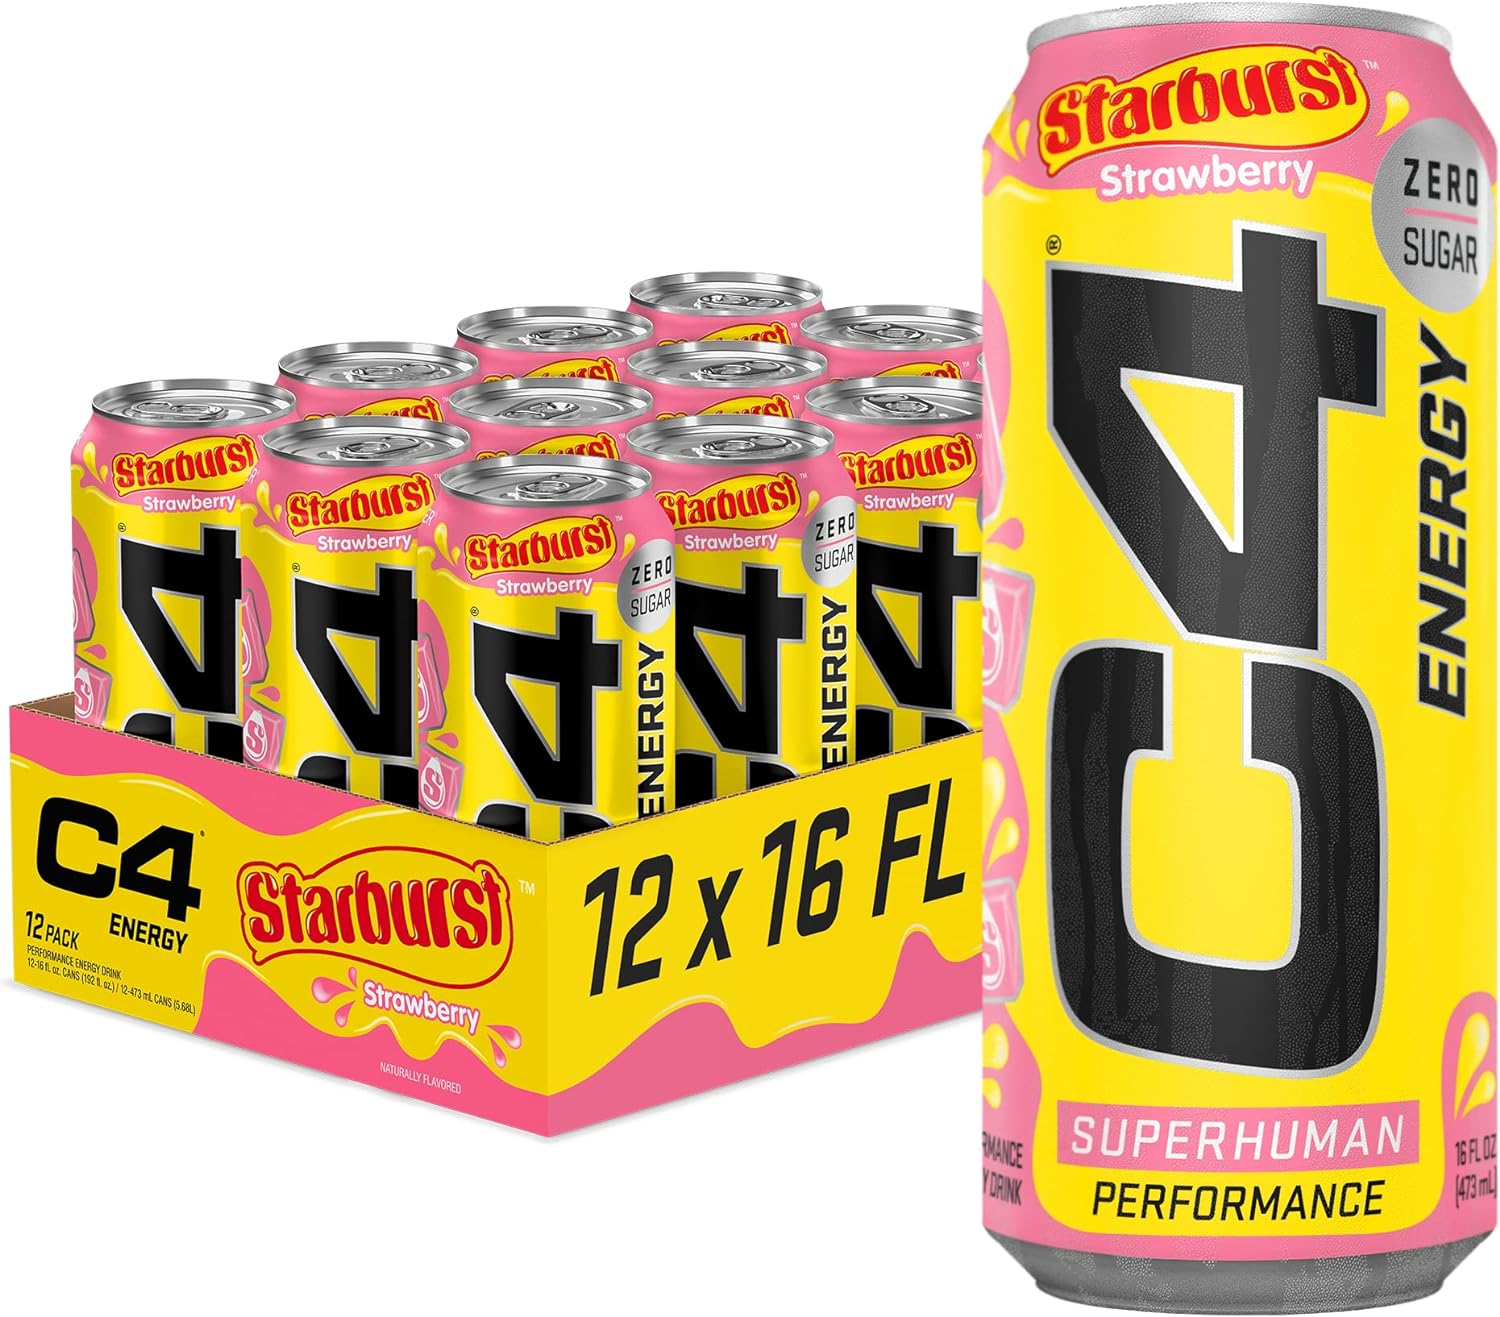 *BACK* 12-Pack 16-Oz Cellucor C4 Sugar Free Energy Drink (Starburst Strawberry) $16.45 w/ S&S + Free S&H w/ Prime or $35+